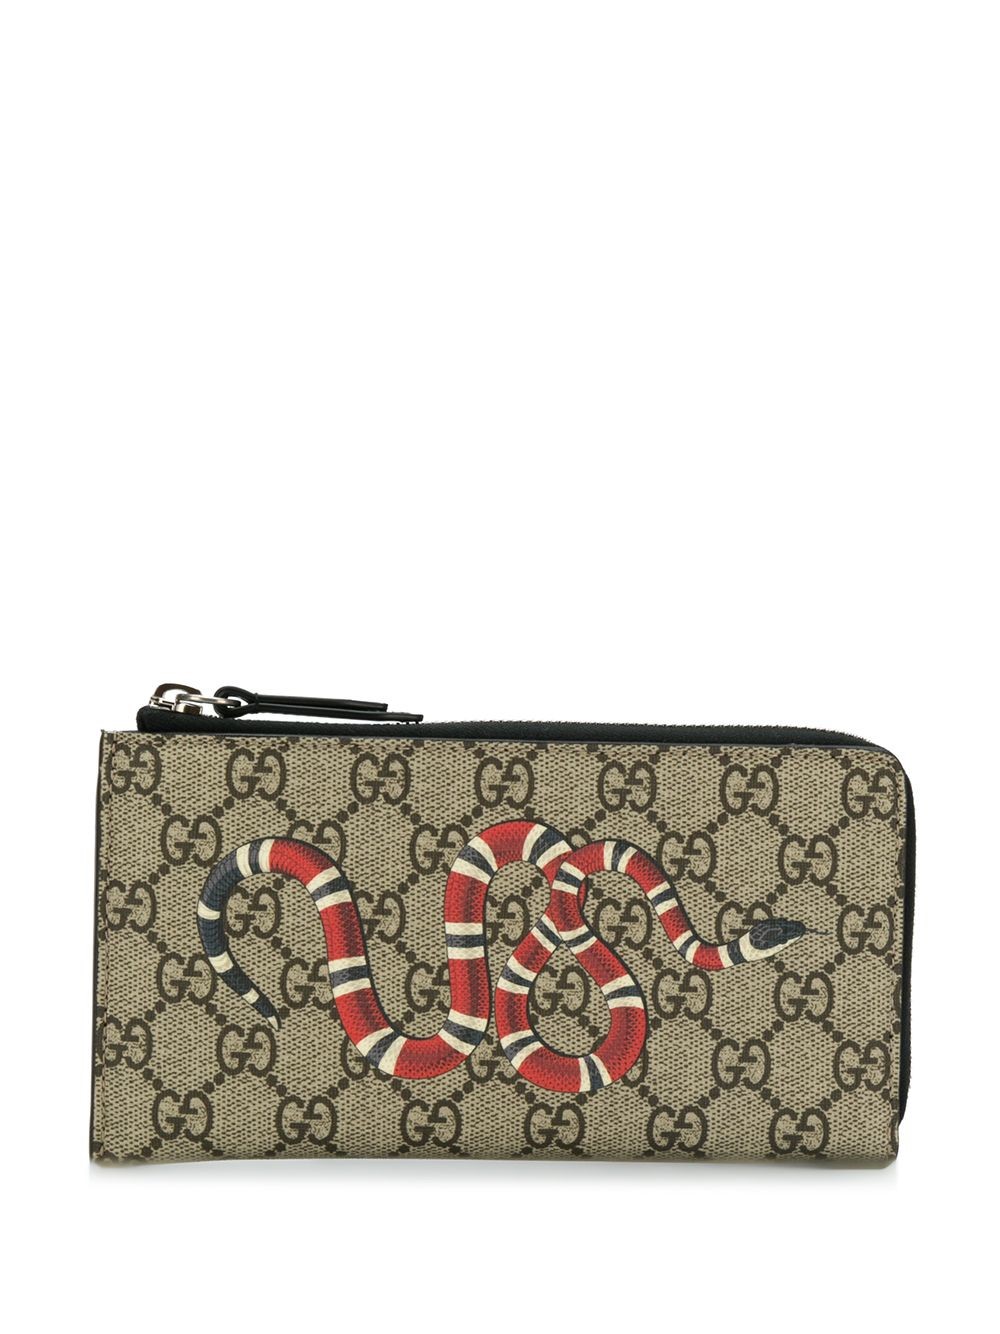 gucci SNAKE WALLET available on montiboutique.com - 29225